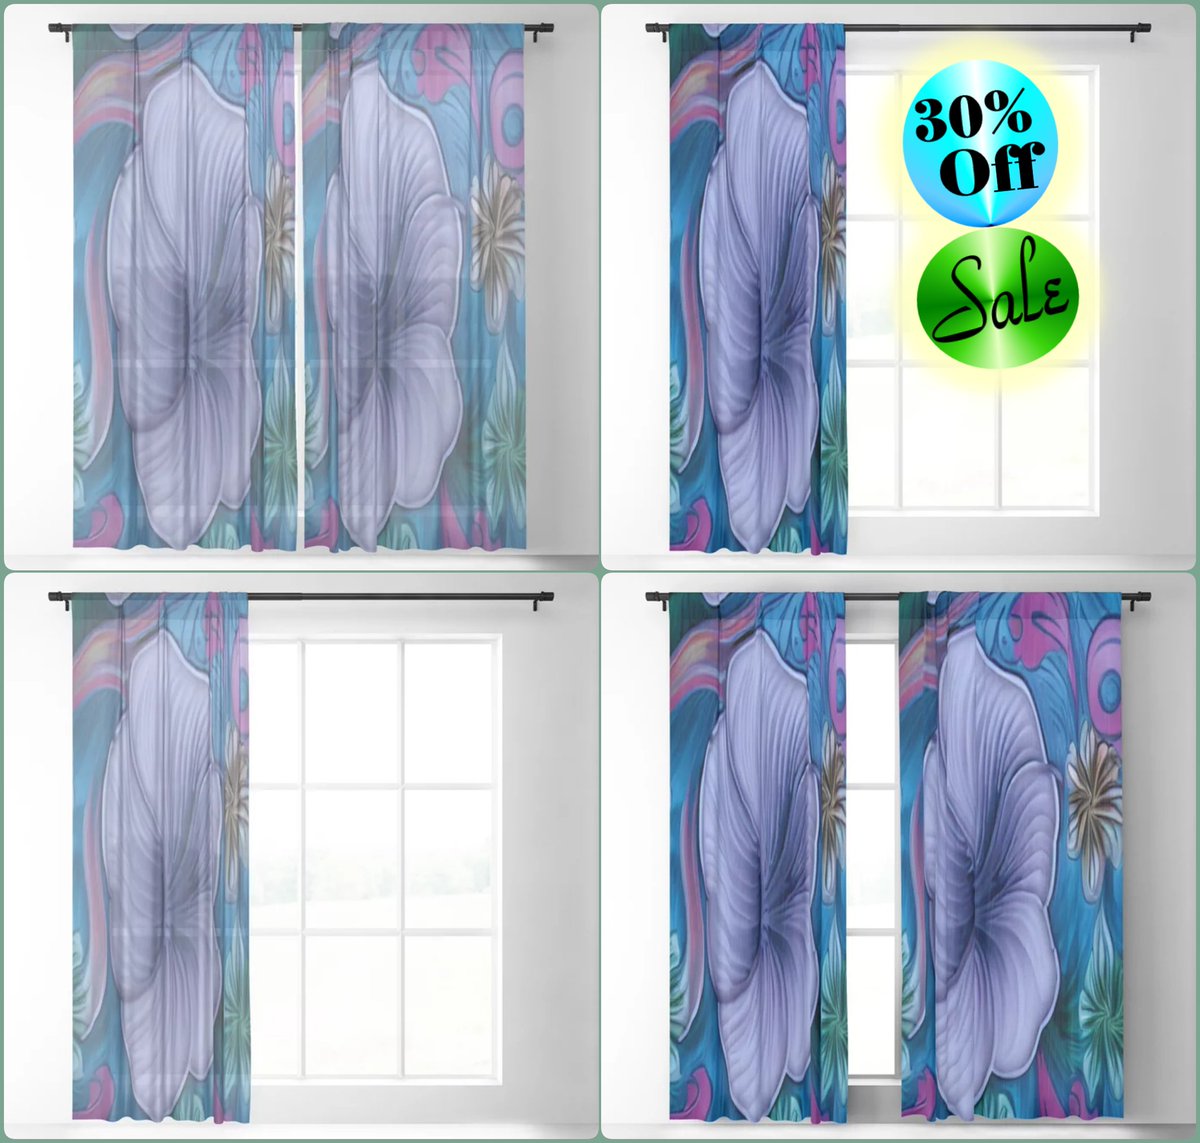 *SALE 30% Off* Glittering Discovery Sheer & Blackout Curtain~by Art Falaxy~ ~Exquisite Decor~ #artfalaxy #art #curtains #drapes #homedecor #society6 #swirls #accents #sheercurtains #blackoutcurtains #floorrugs society6.com/product/glitte… society6.com/product/glitte…